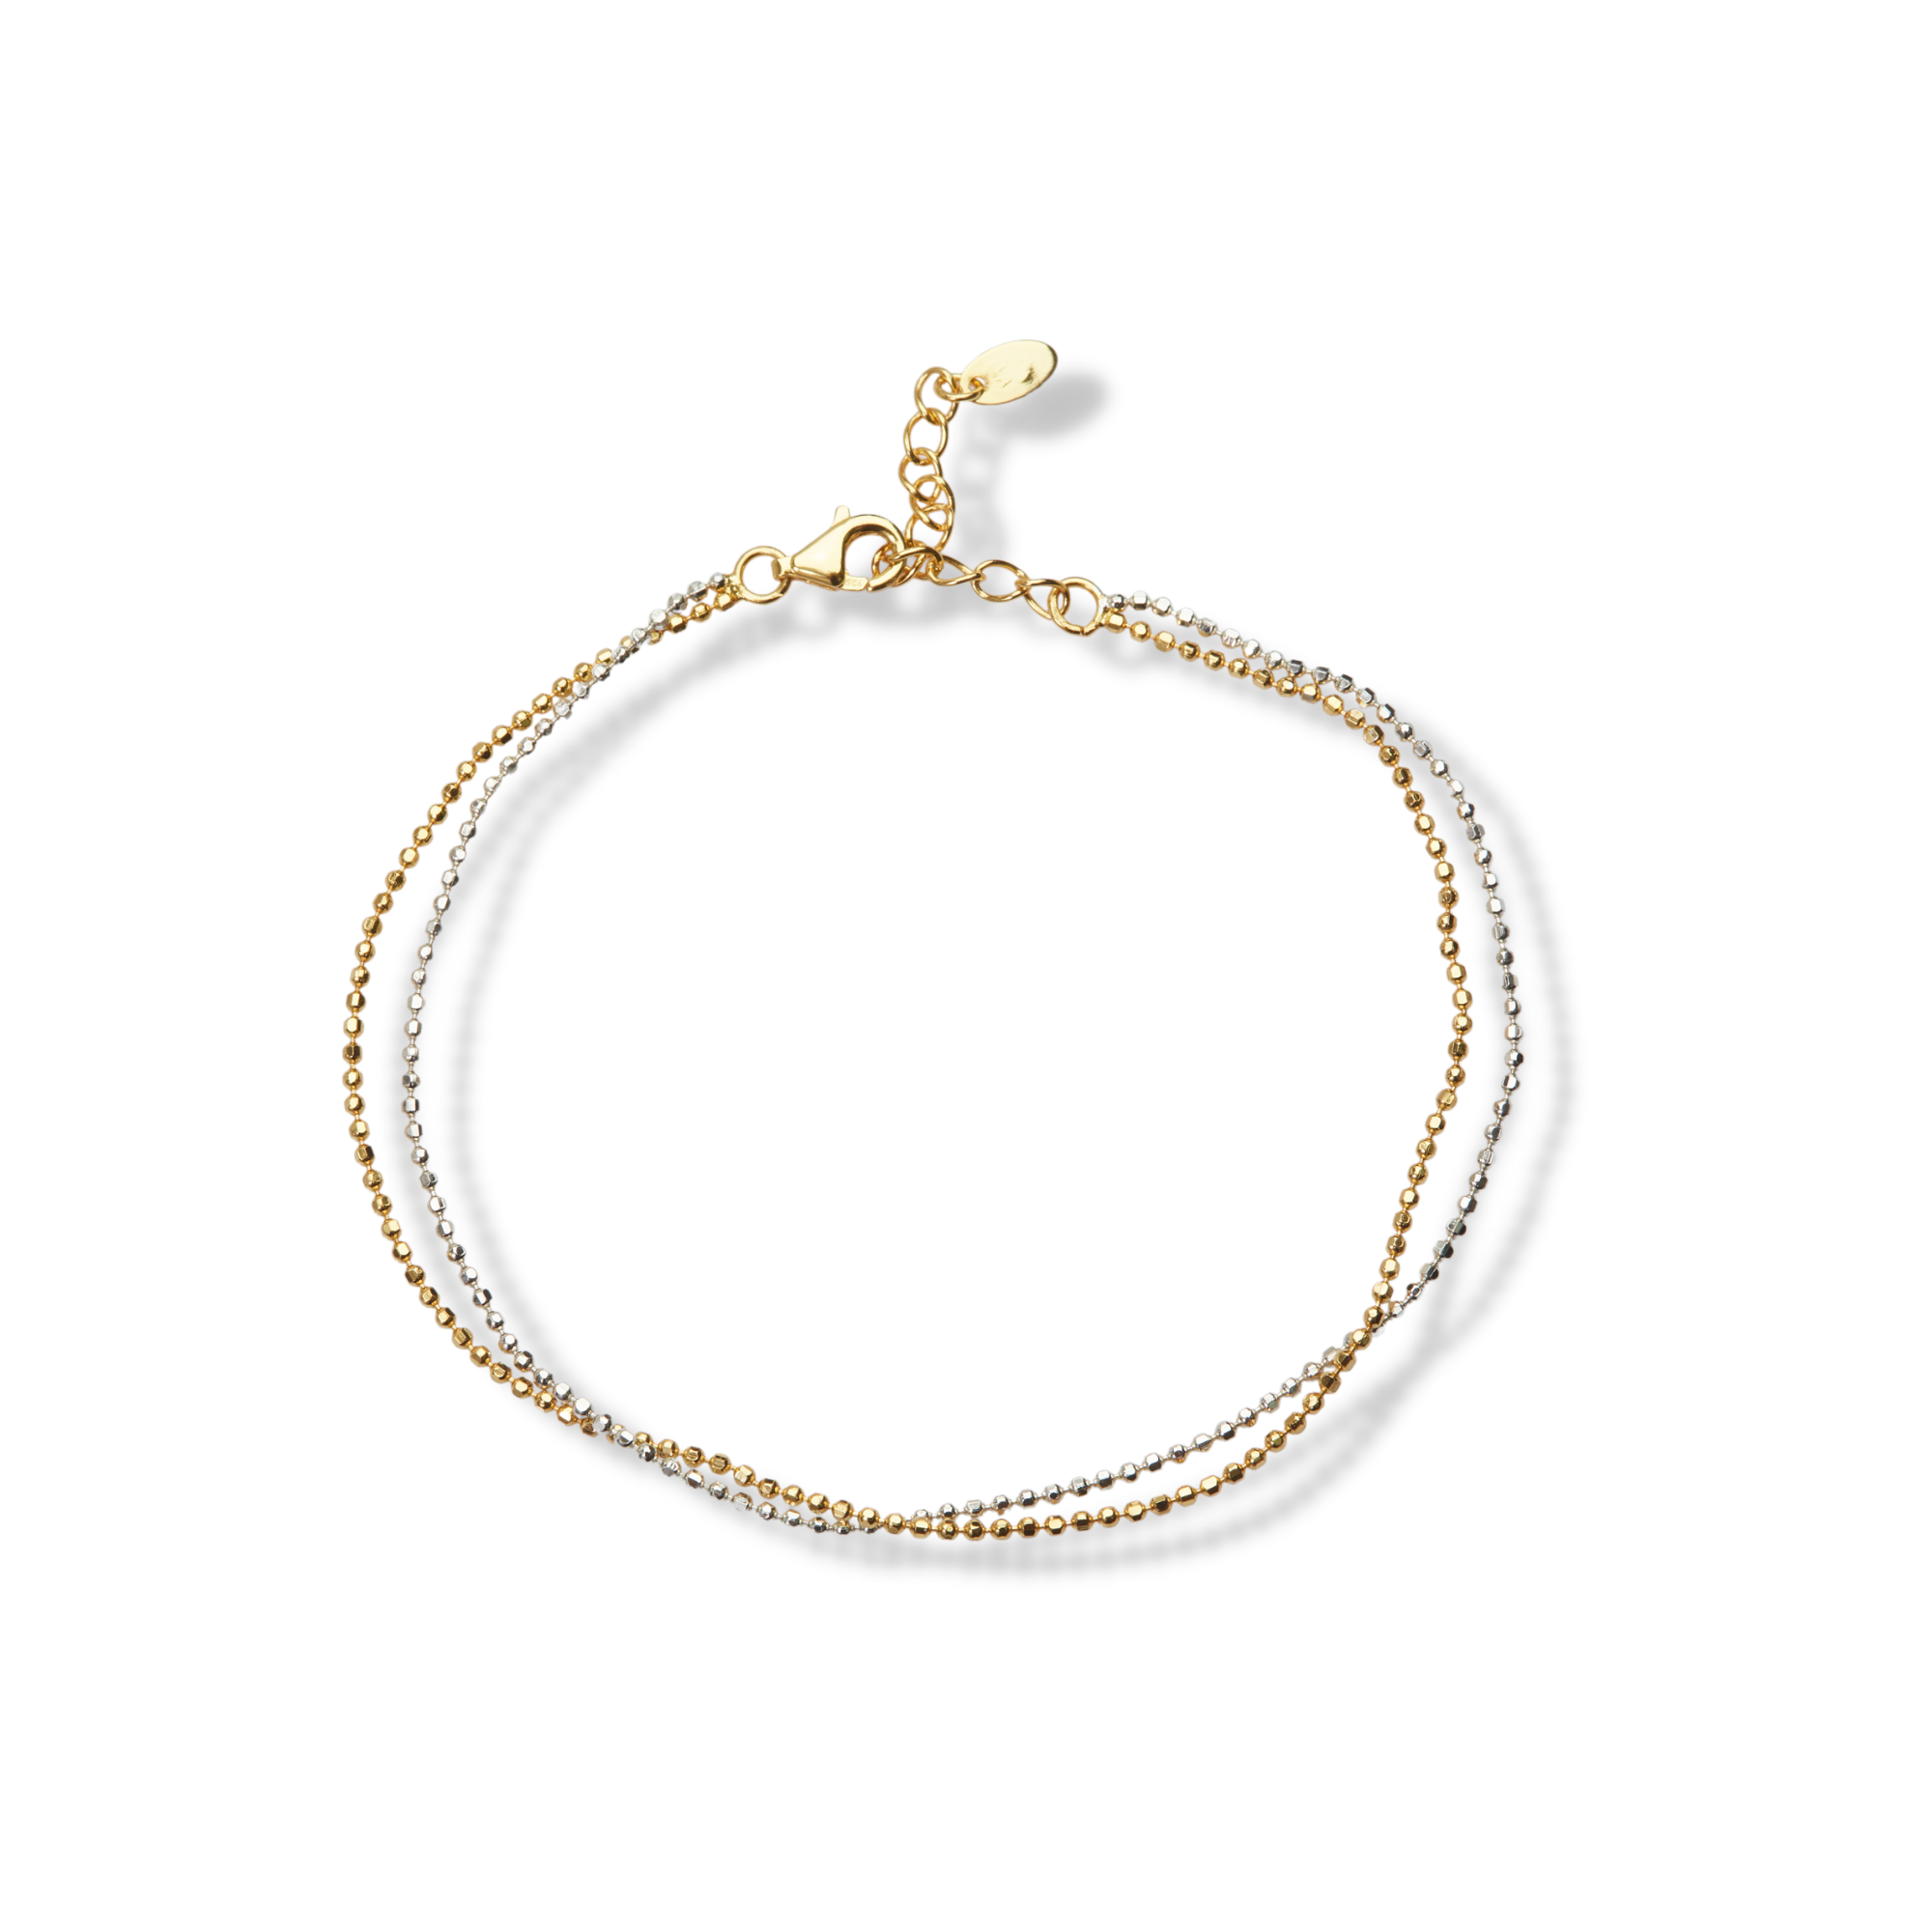 THE TWO TONE LAYERED BRACELET